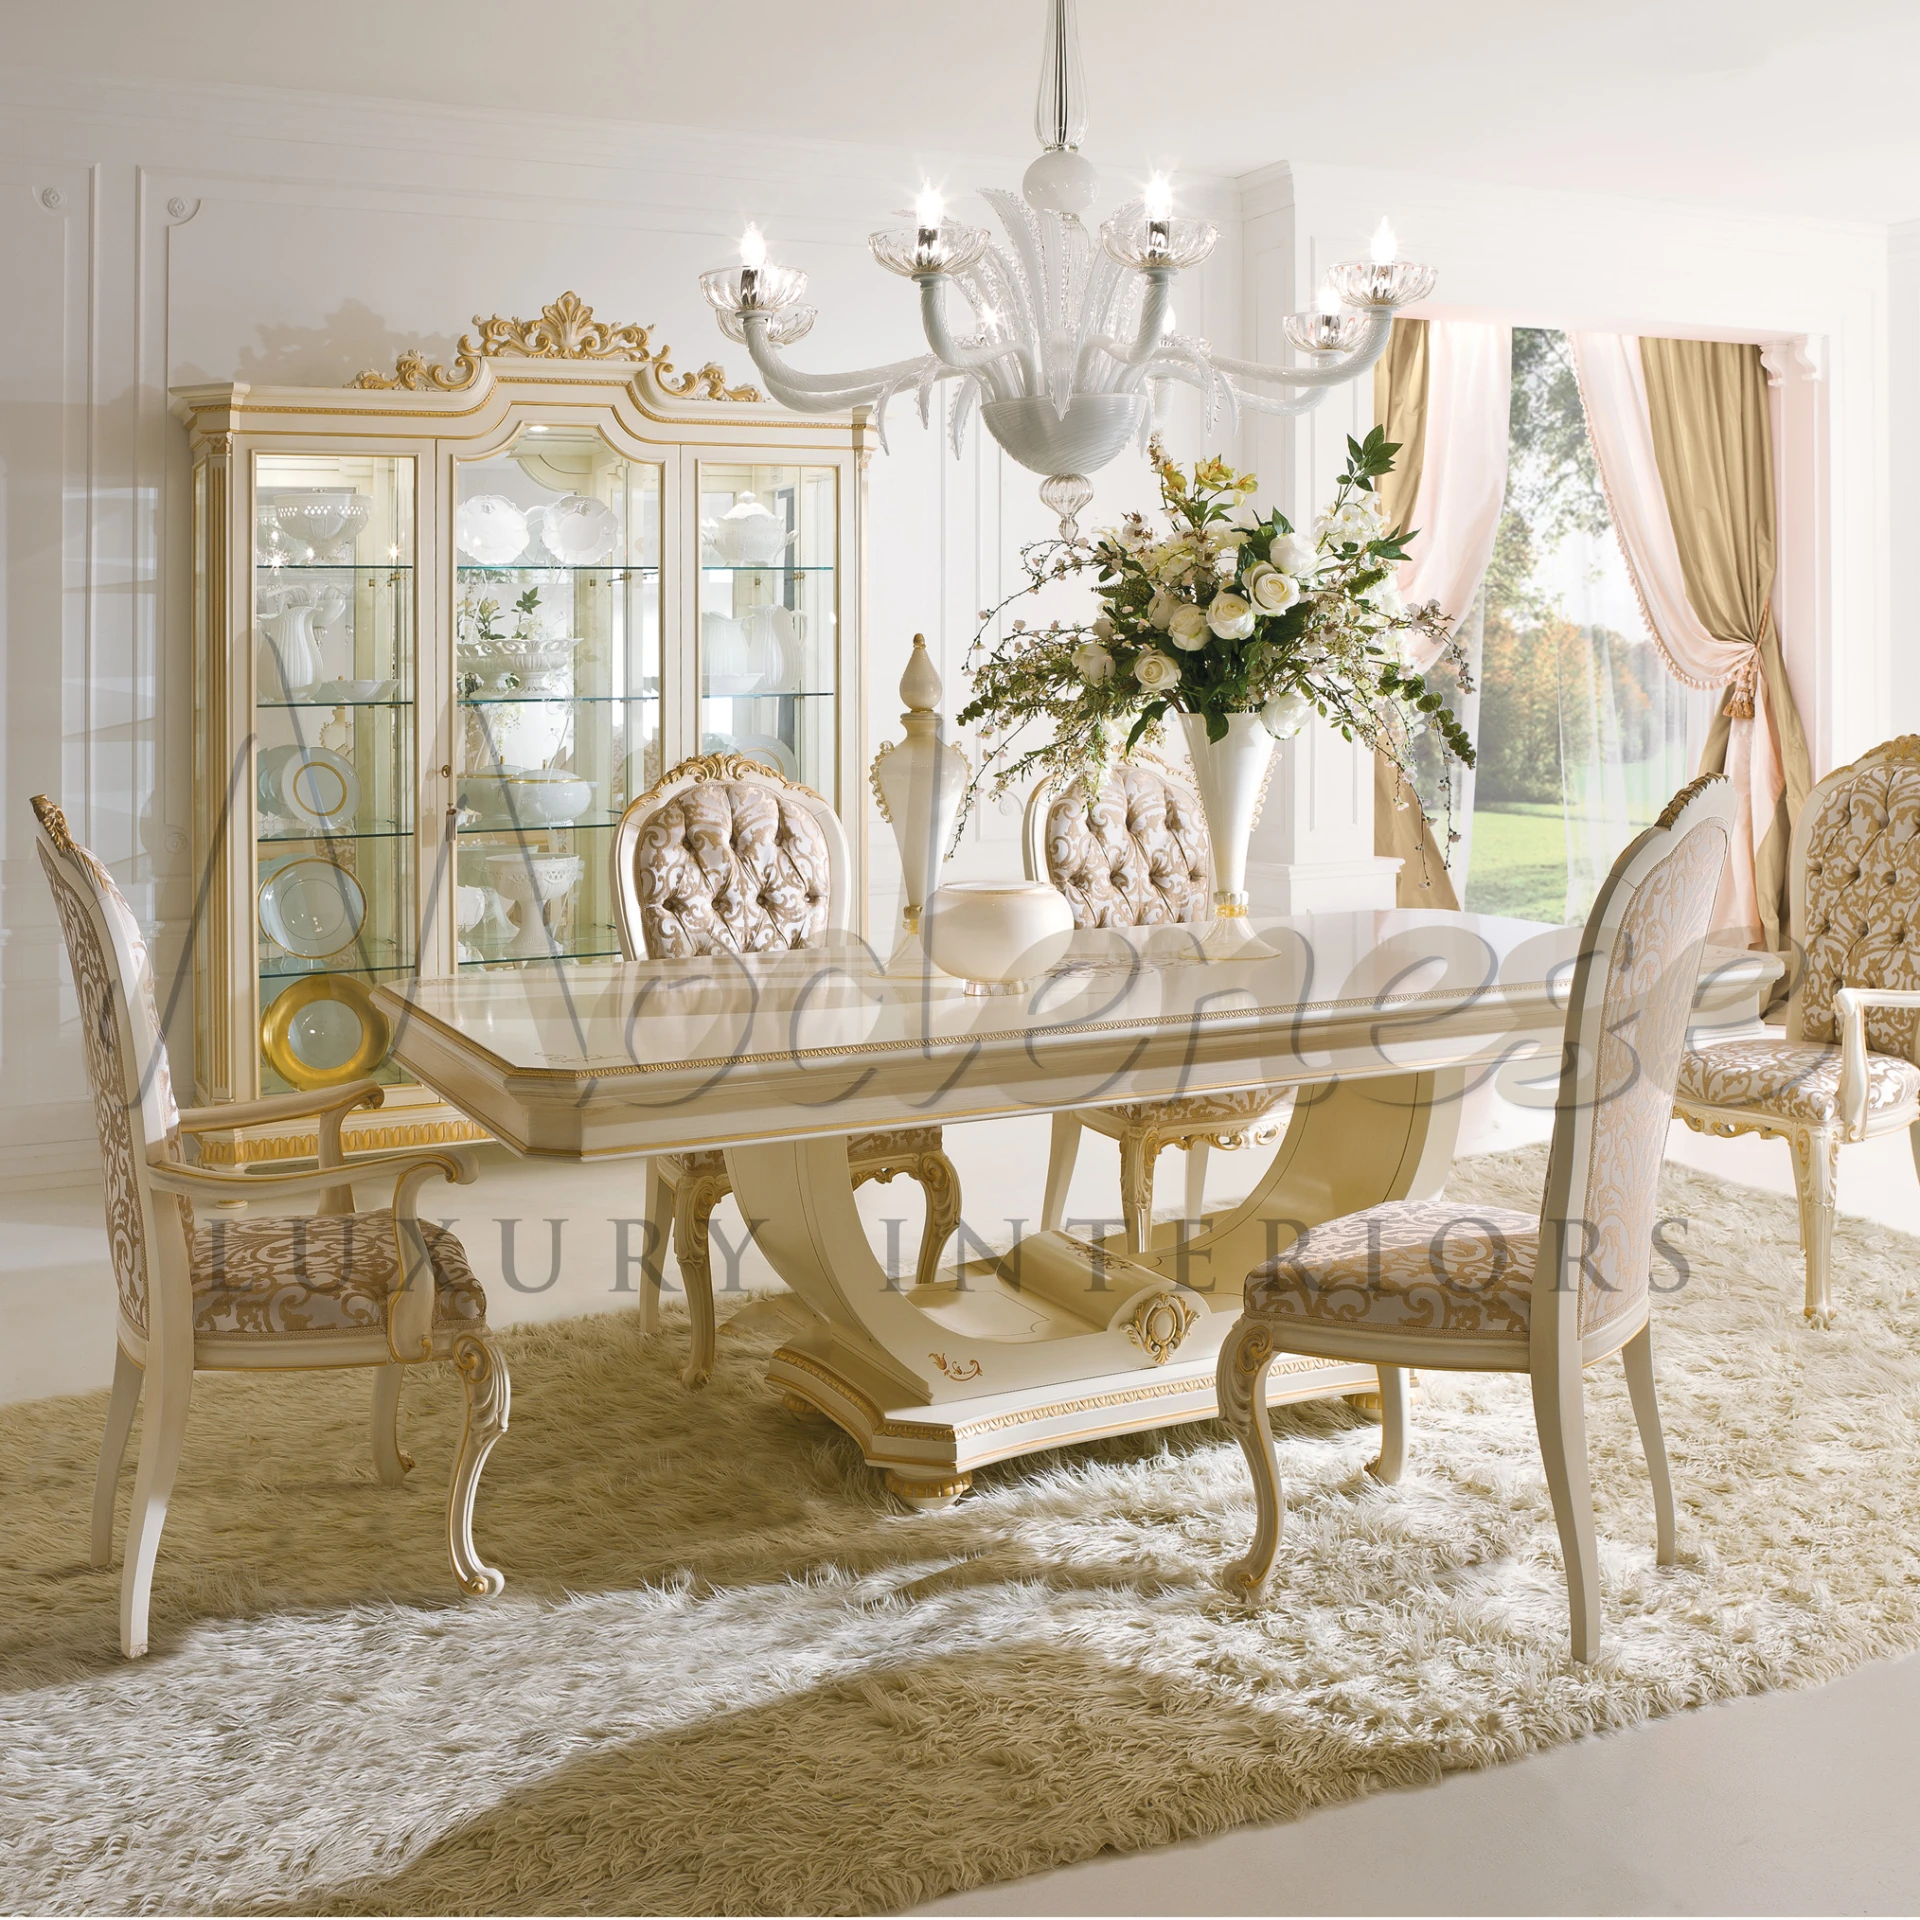 Luxurious Venetian style dining set with cream and gold design details and crystal chandelier.